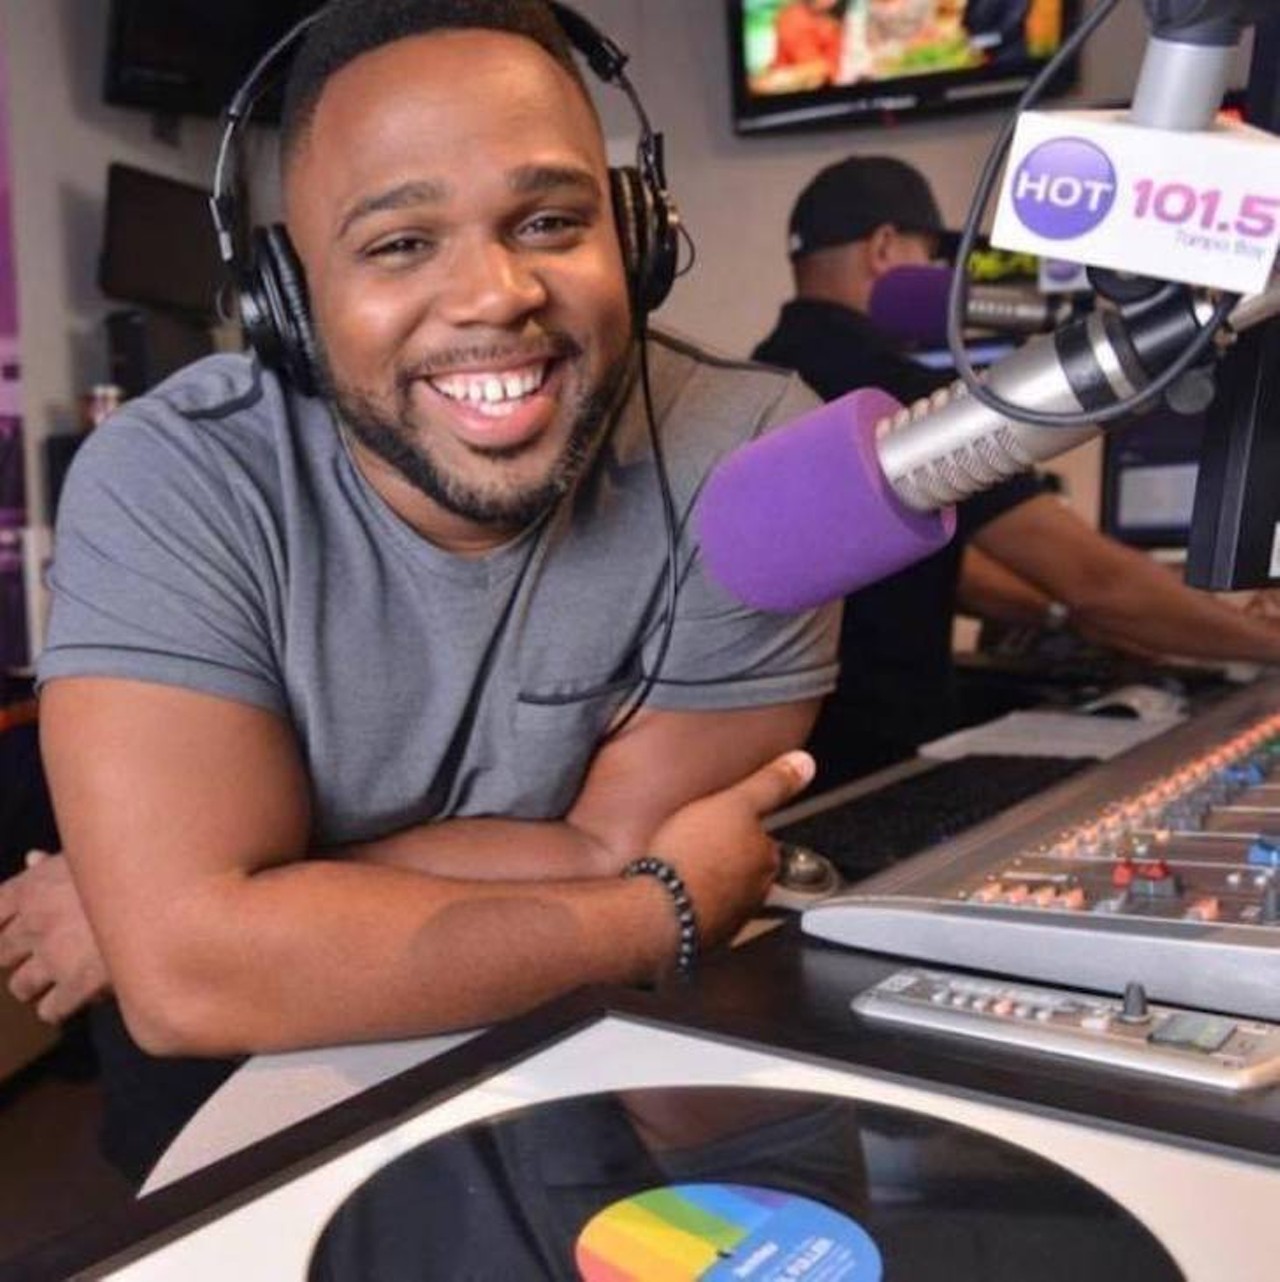 Miguel Fuller
He&#146;s the Miguel from Miguel and Holly Mornings on Hot 101.5. In case you don&#146;t listen to 101.5, Fuller is an openly gay radio host who uses his platform to support LGBTQ+ causes.
Photo via Miguel Fuller&#146;s Facebook